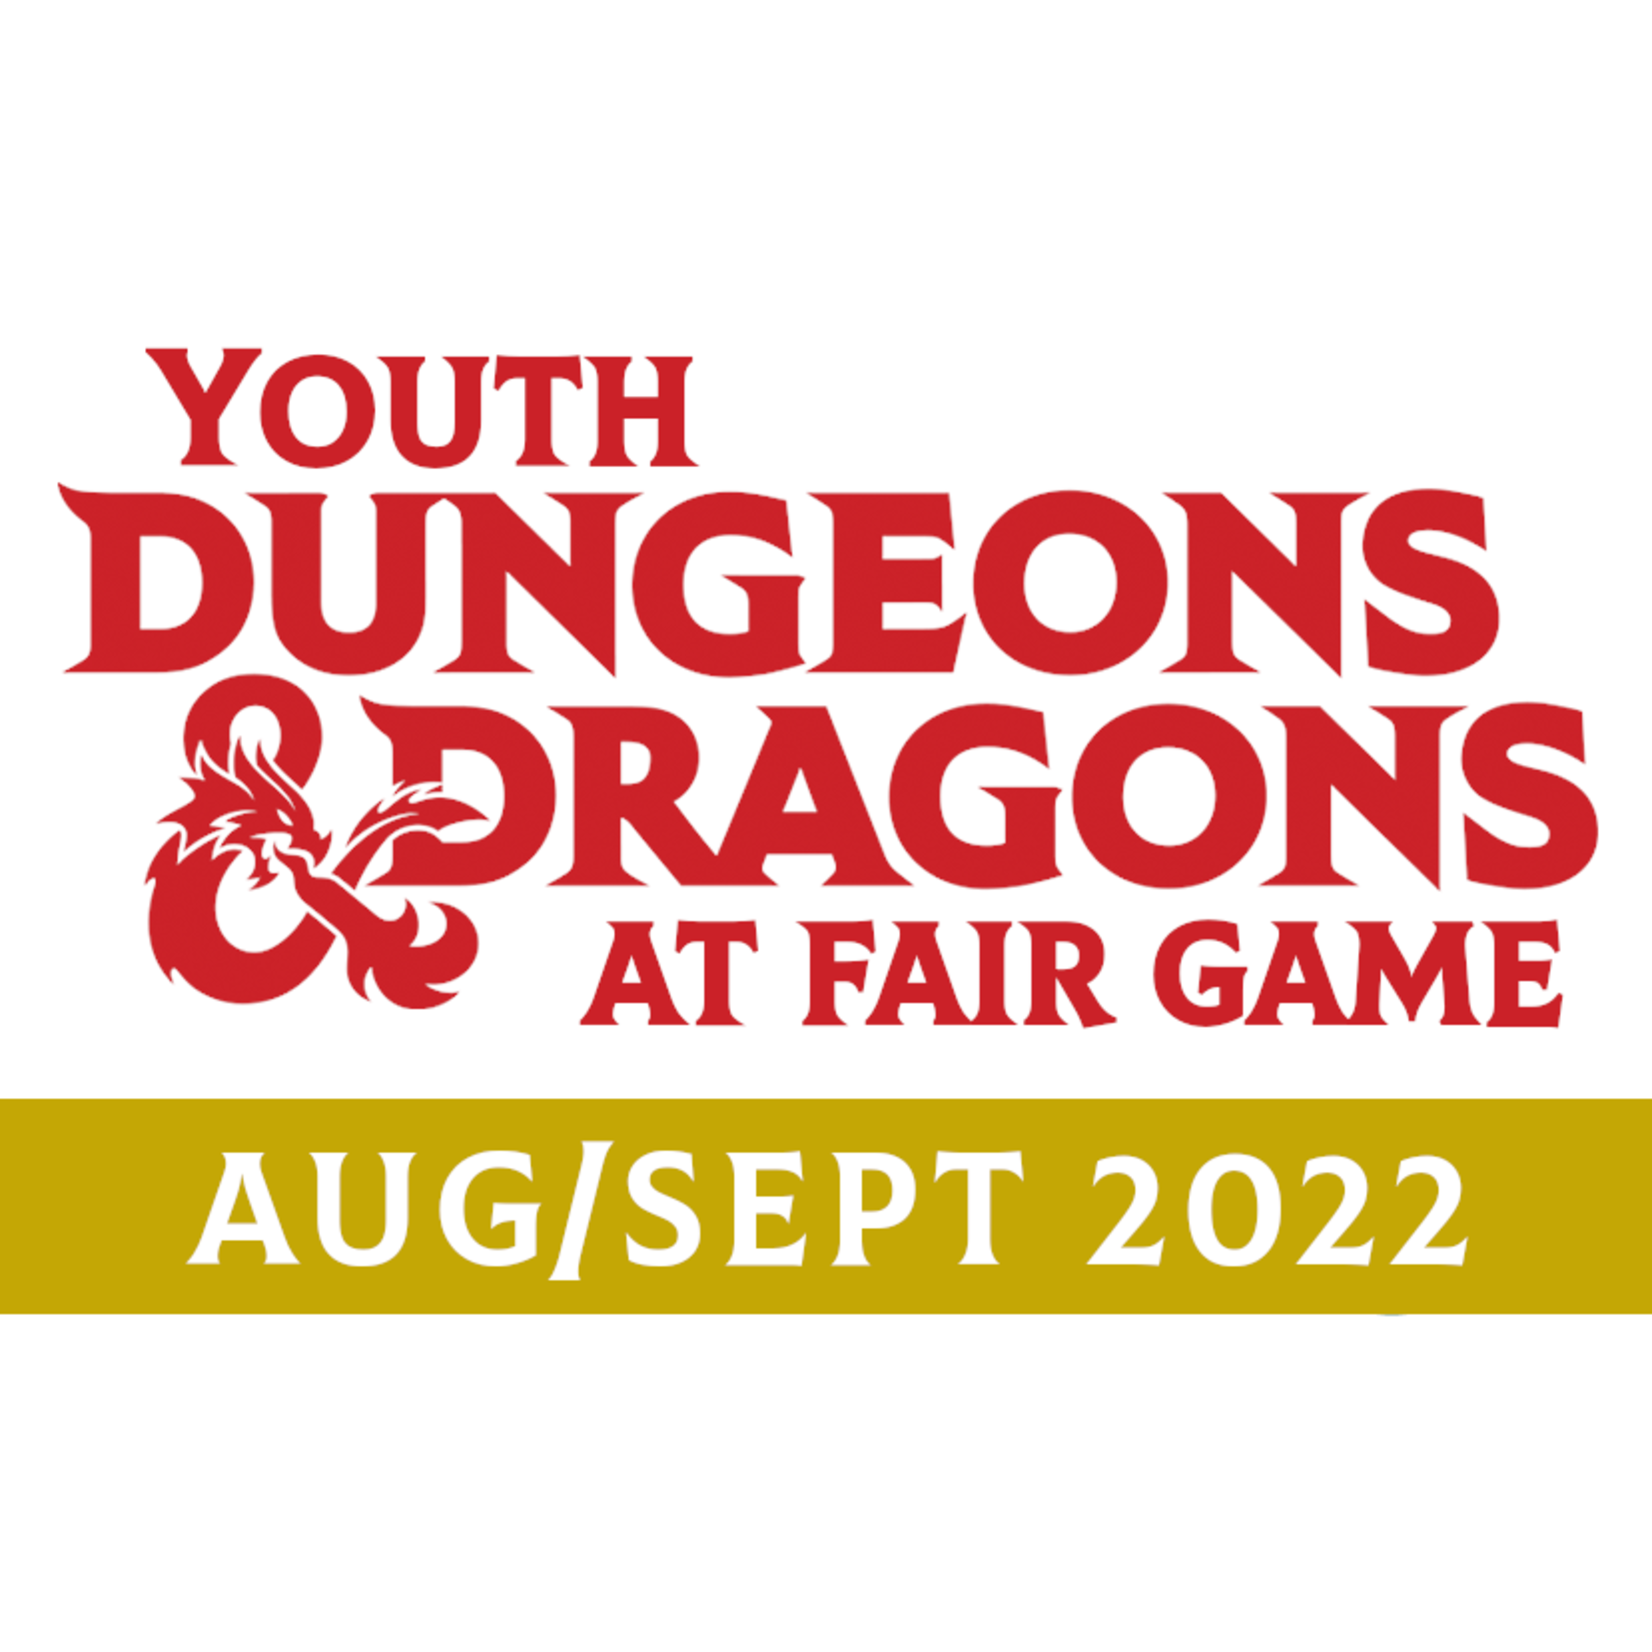 Fair Game YDND Aug/Sept 2022: Group VI1 - Friday Virtual 4-6 PM CST (Ages 13-17)